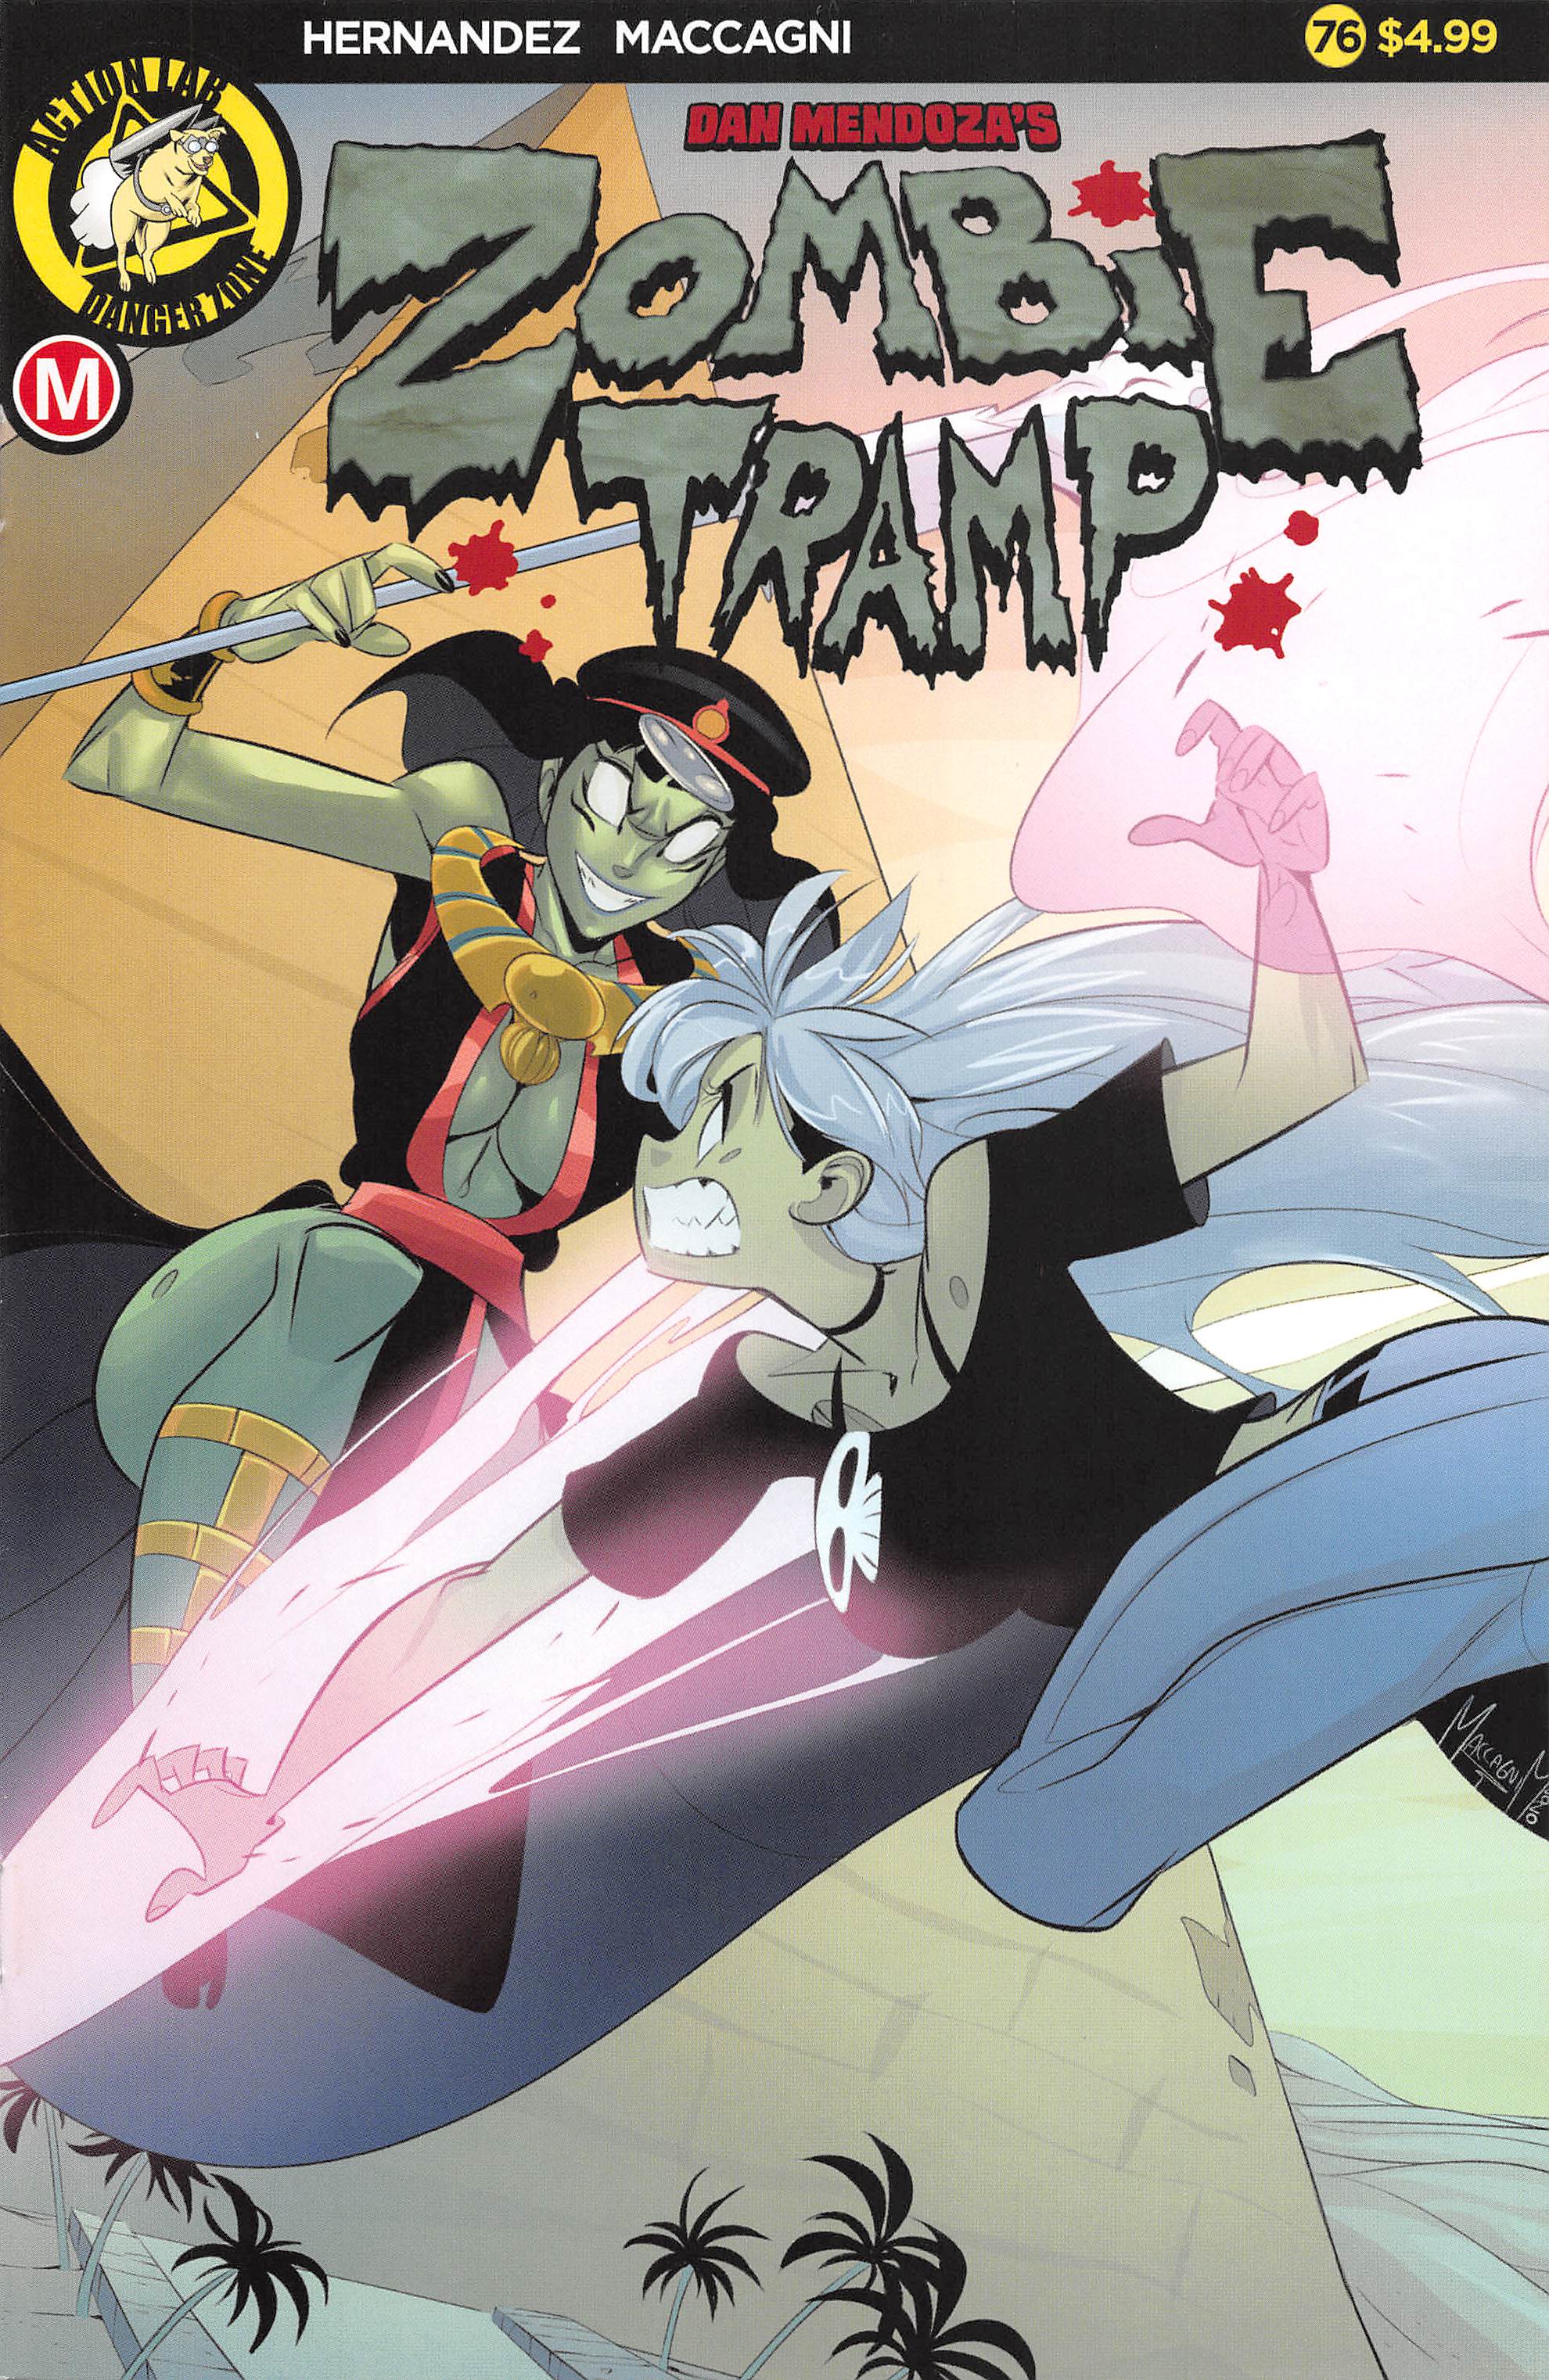 Zombie Tramp (2014-): Chapter 76 - Page 1